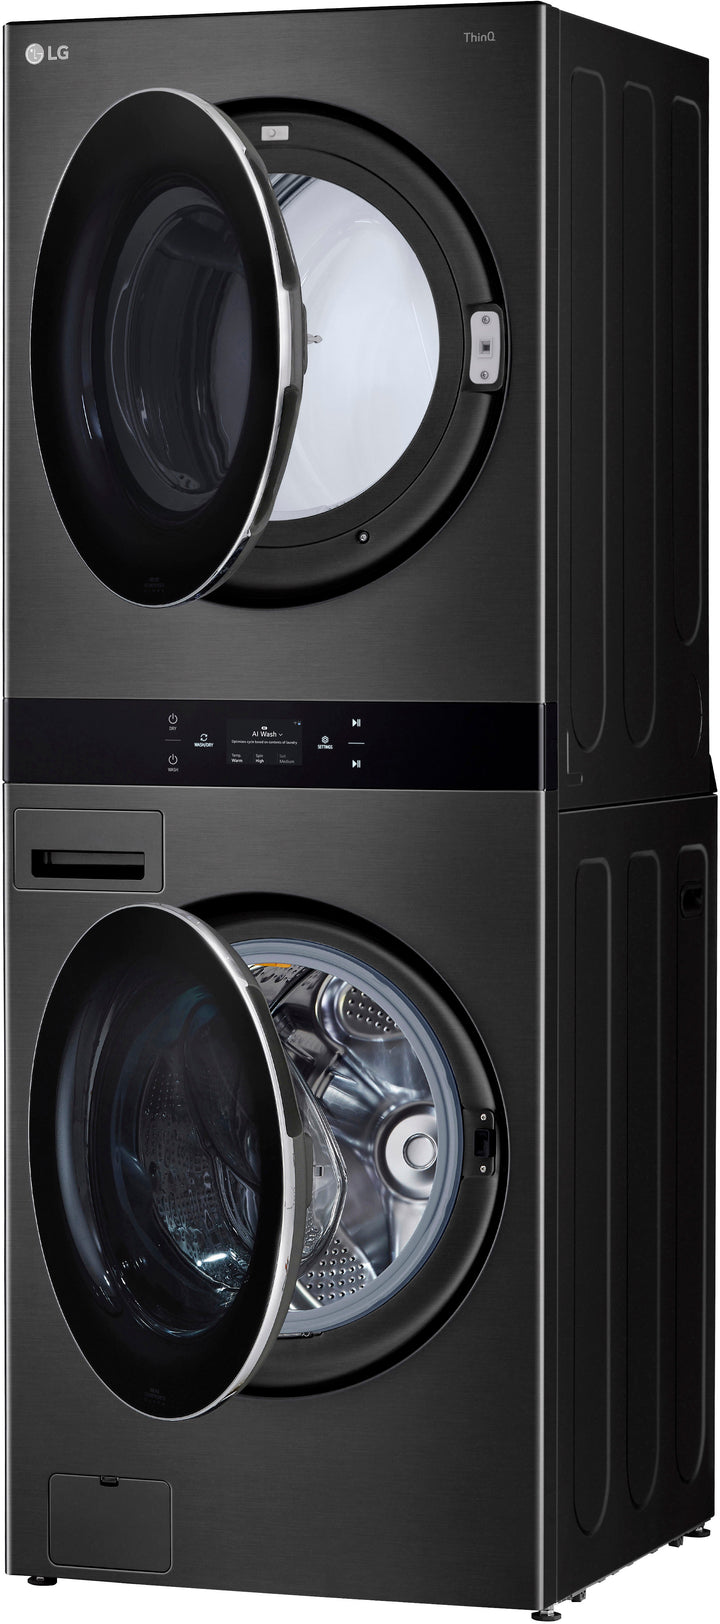 LG - 5.0 Cu. Ft. HE Smart Front Load Washer and 7.4 Cu. Ft. Gas Dryer WashTower with Steam and Center Control - Black Steel_24